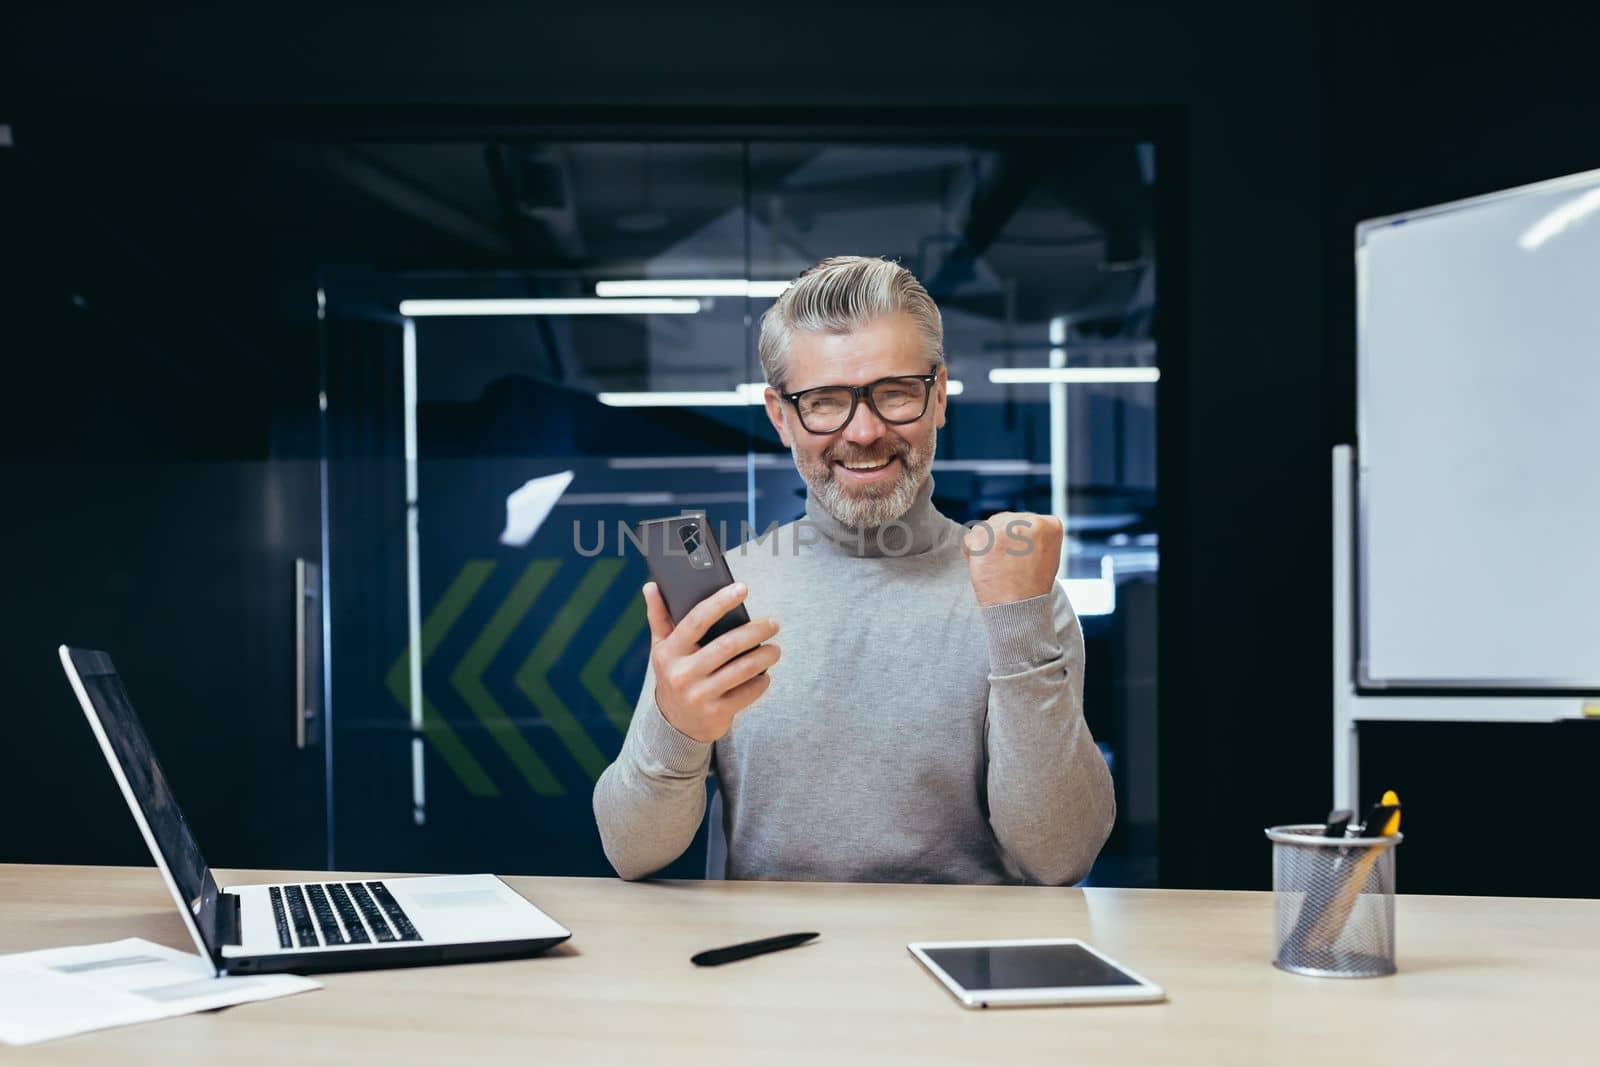 Businessman celebrating victory and success, mature gray haired man inside office got good news result using smartphone, man at work with laptop.